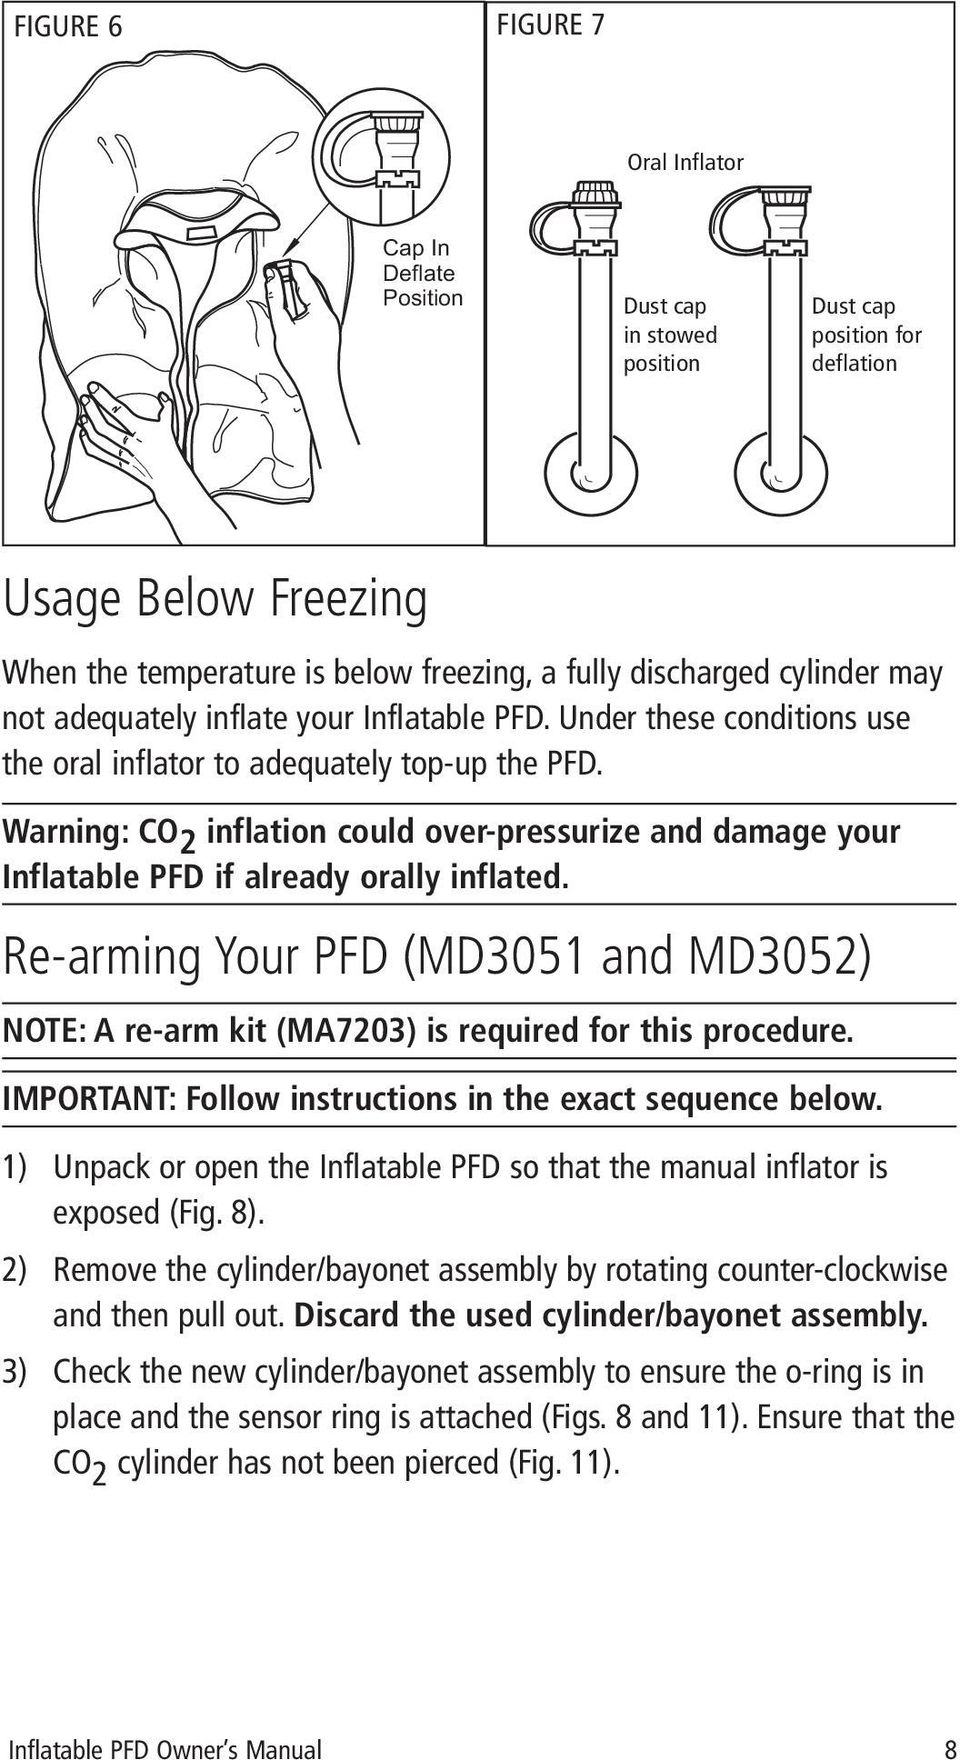 Warning: CO 2 inflation could over-pressurize and damage your Inflatable PFD if already orally inflated.